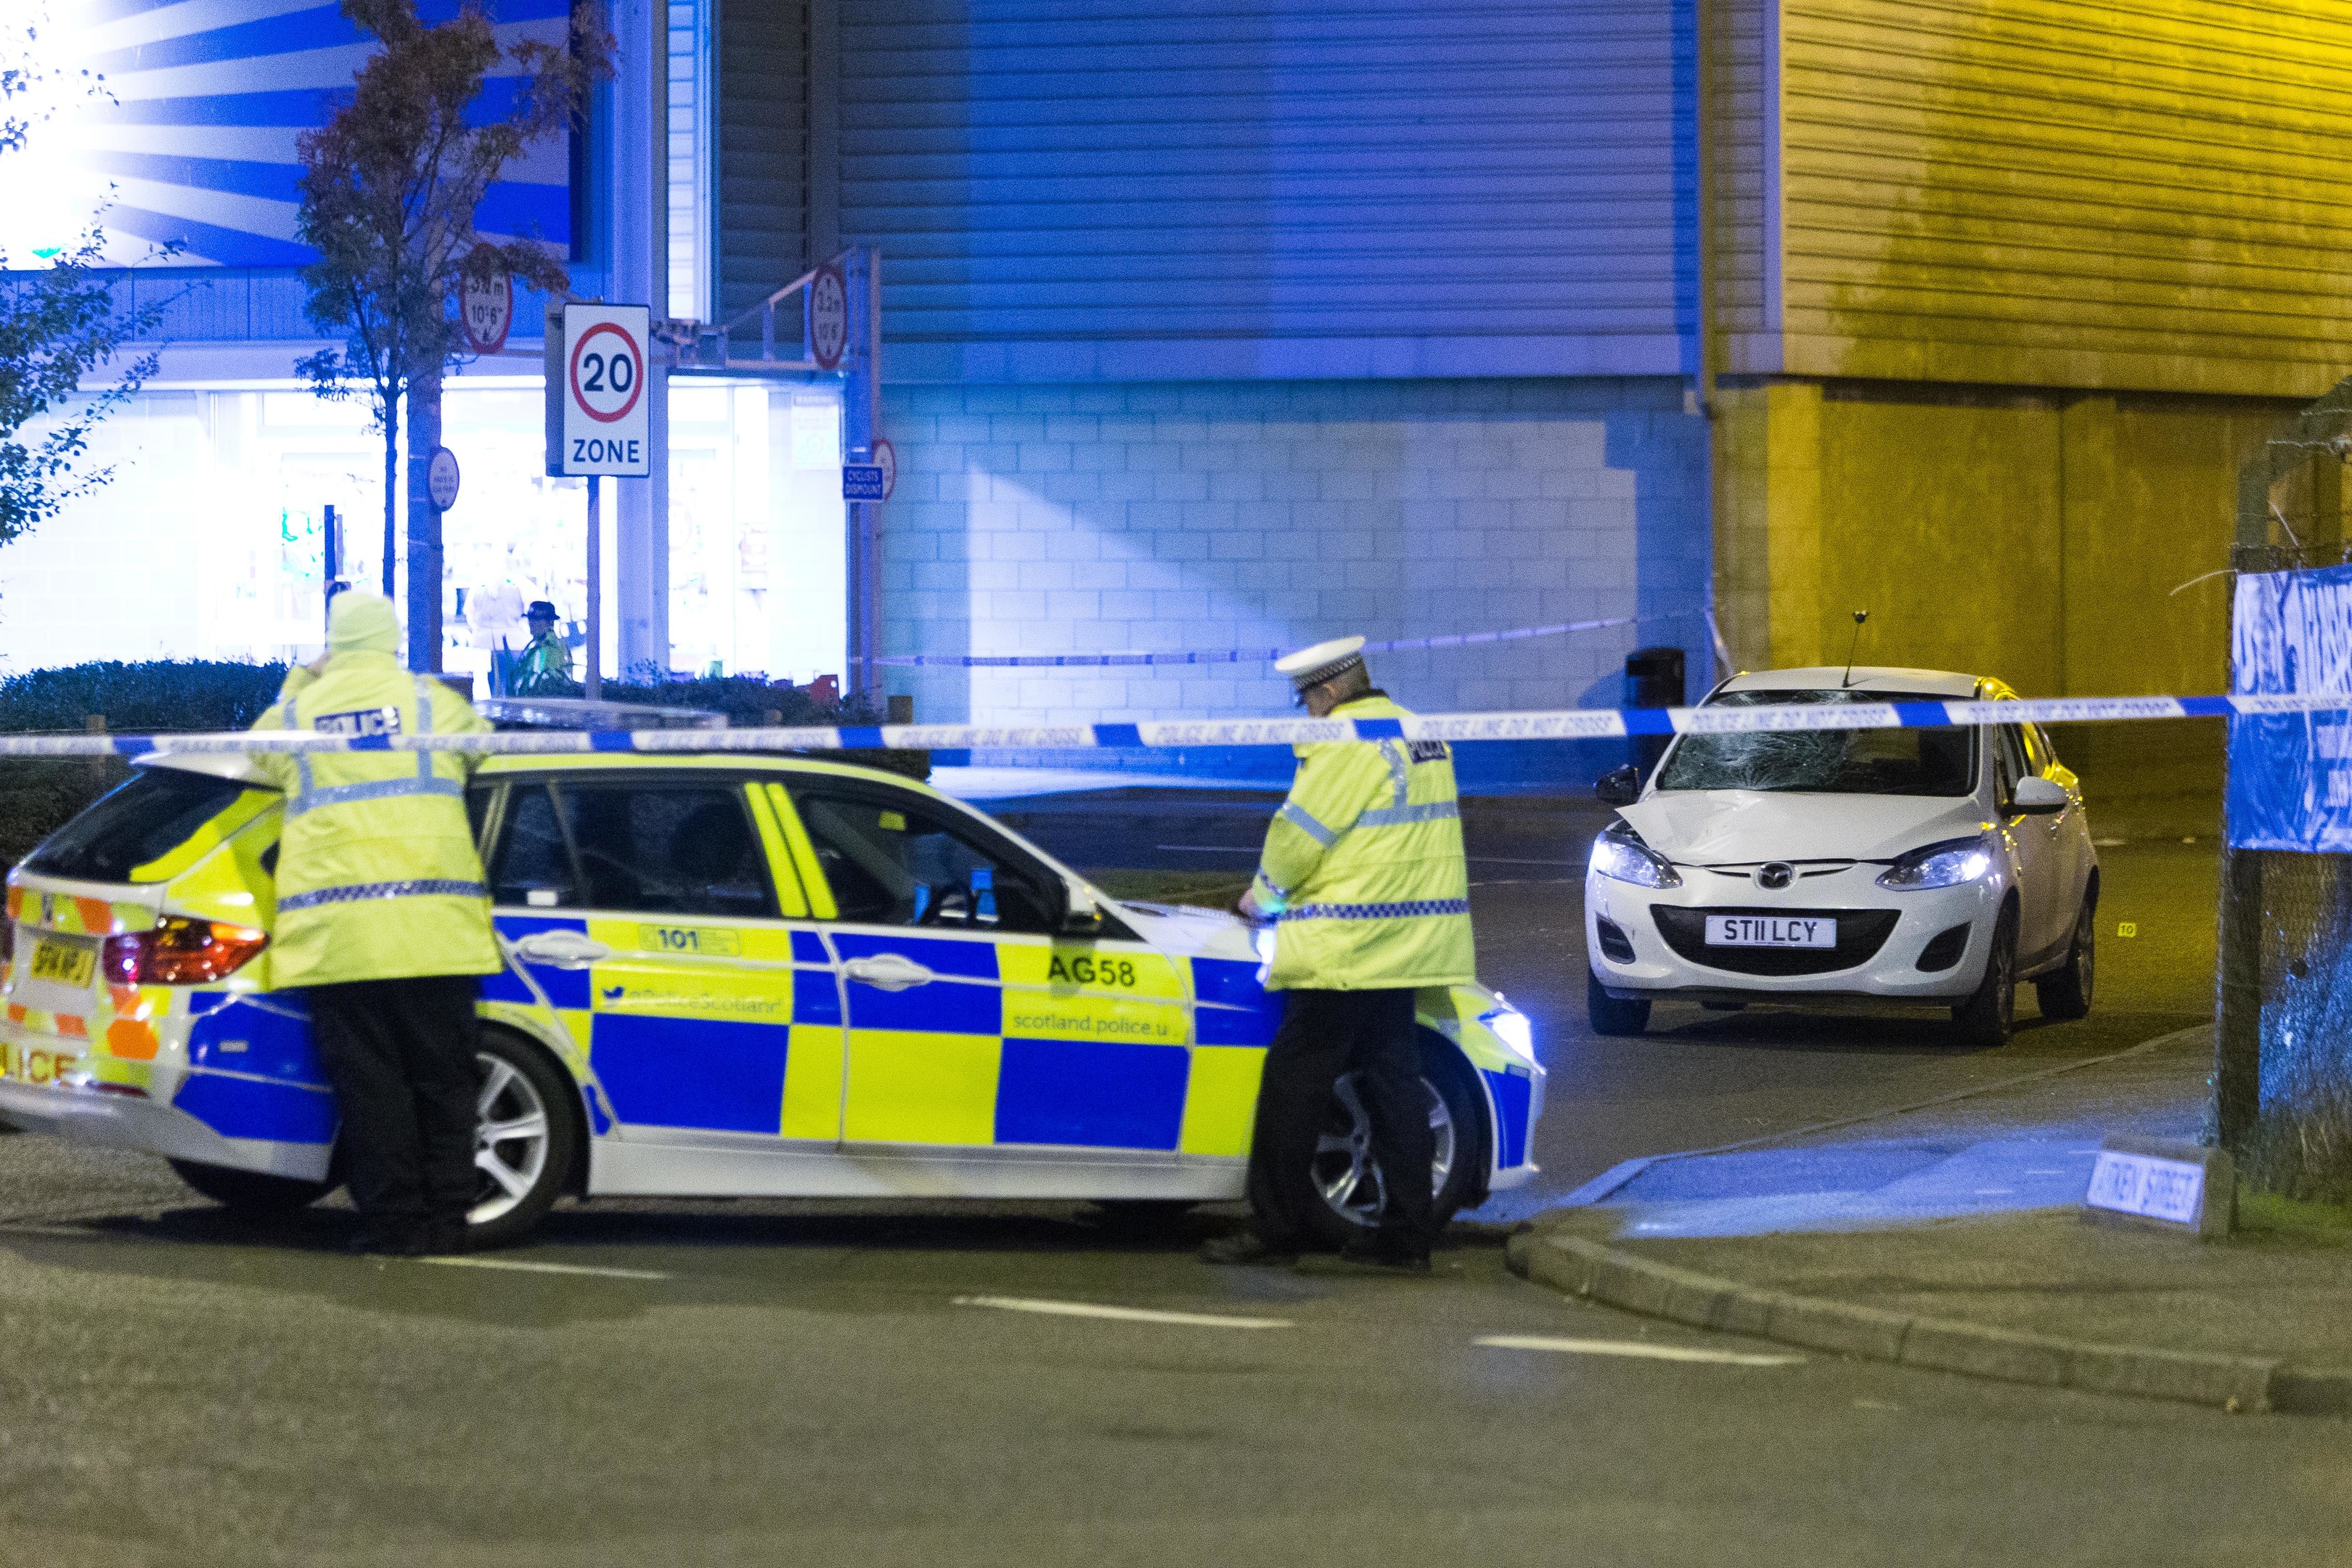 Emergency services were quickly on the scene of the fatal accident near the Riverside Retail Park.